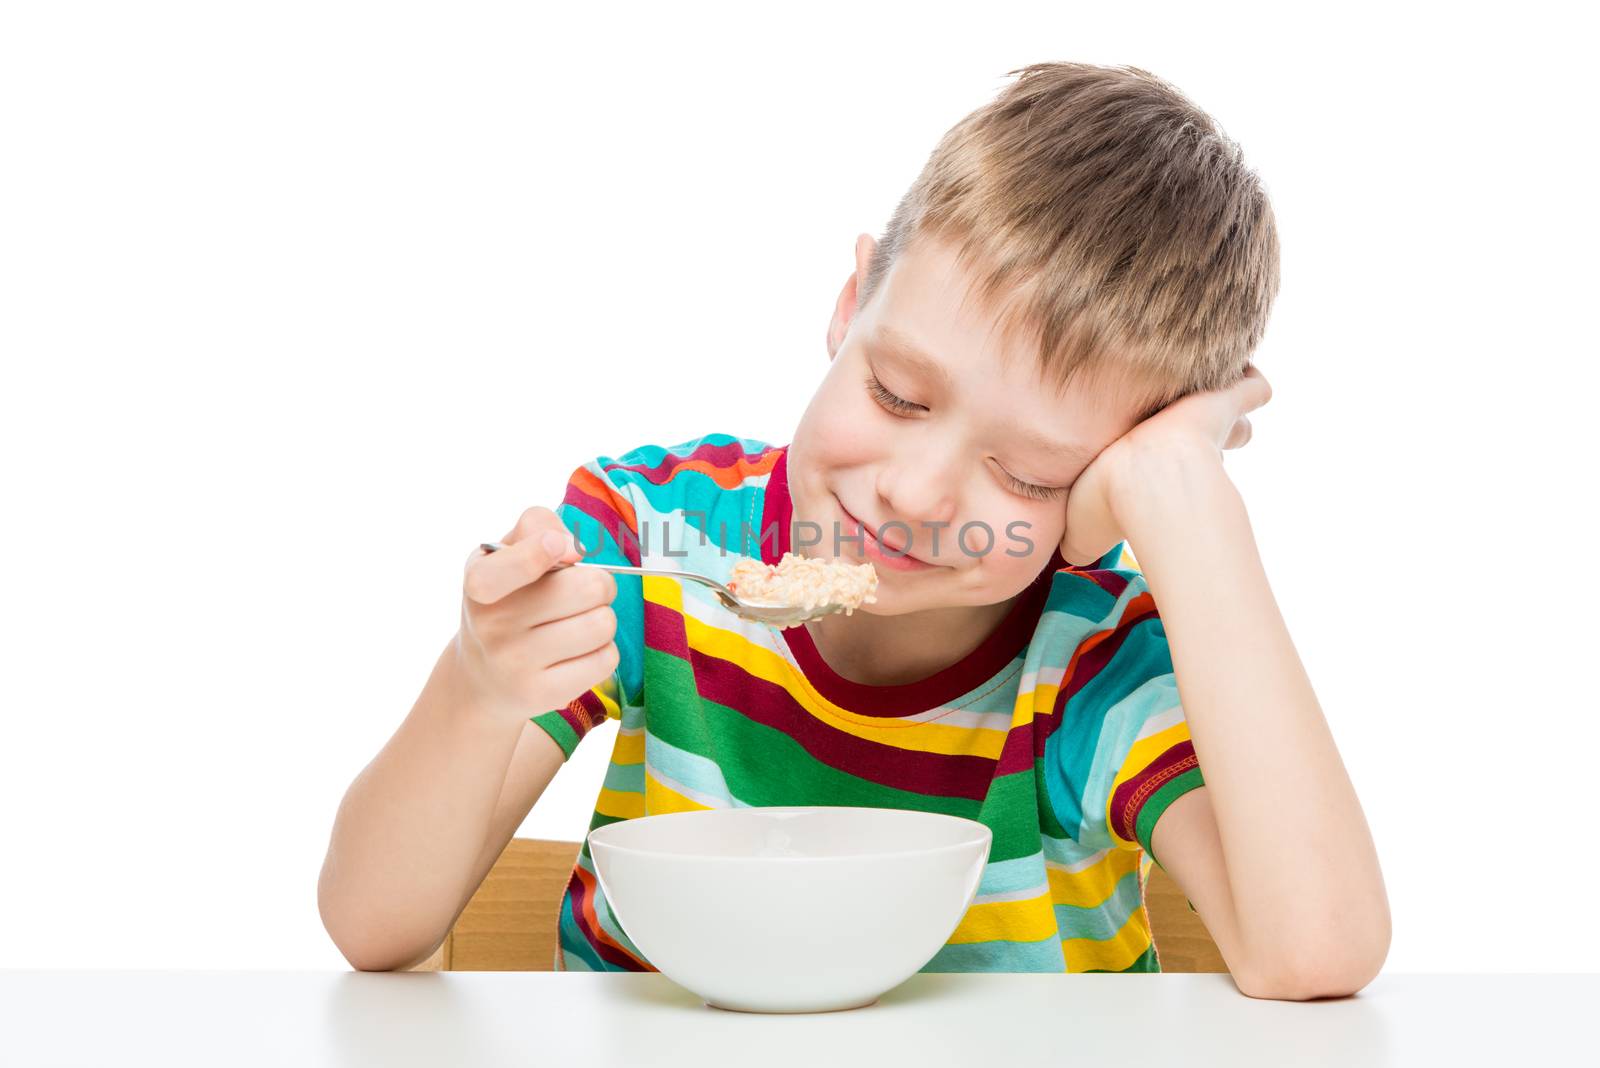 healthy food - oatmeal for breakfast, a boy with a plate on a wh by kosmsos111